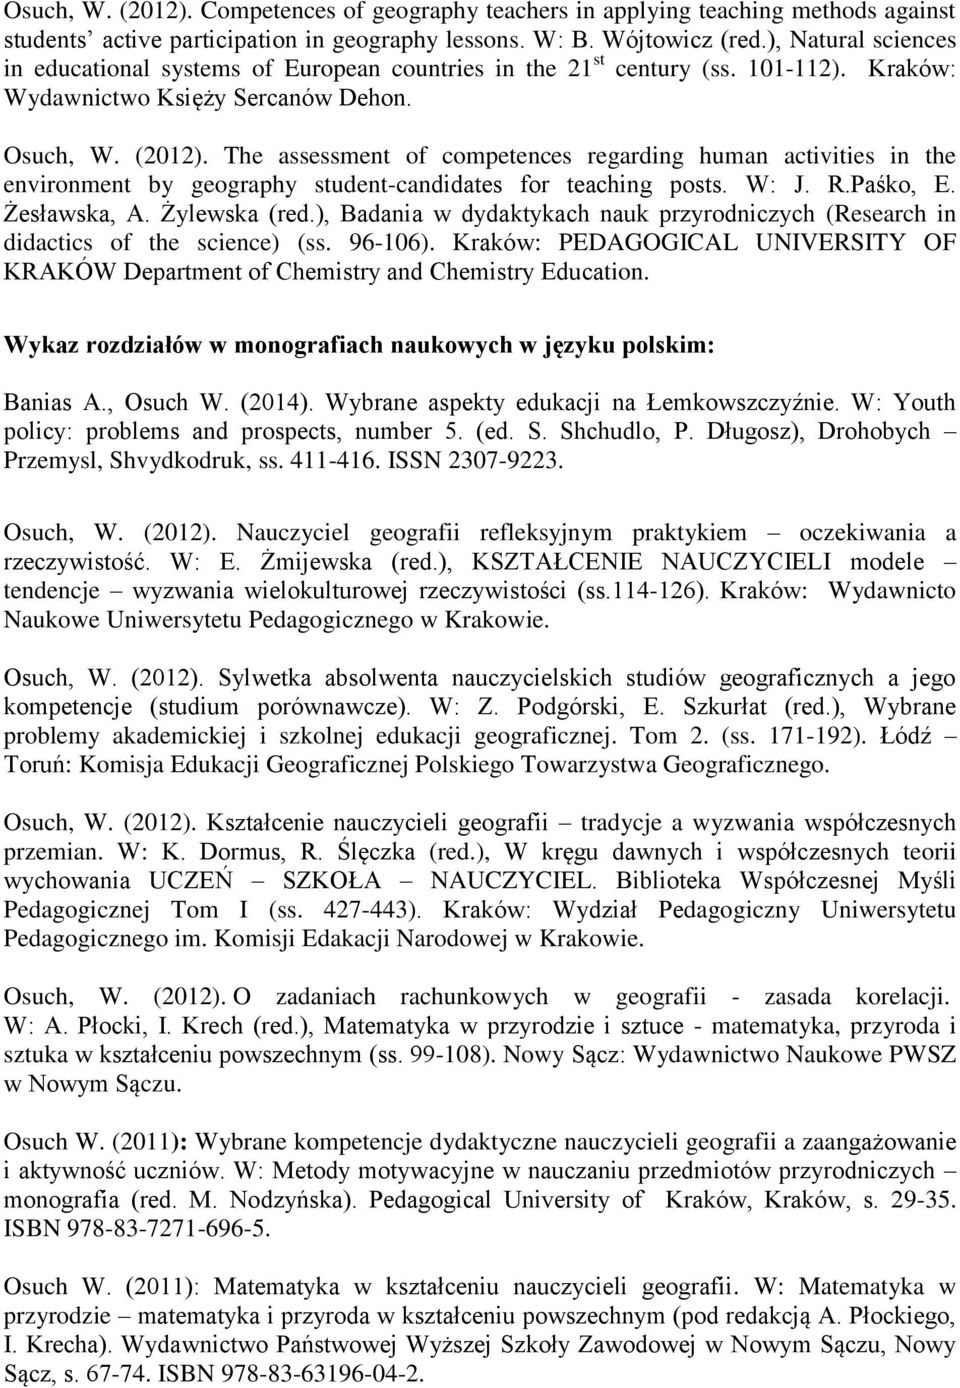 The assessment of competences regarding human activities in the environment by geography student-candidates for teaching posts. W: J. R.Paśko, E. Żesławska, A. Żylewska (red.